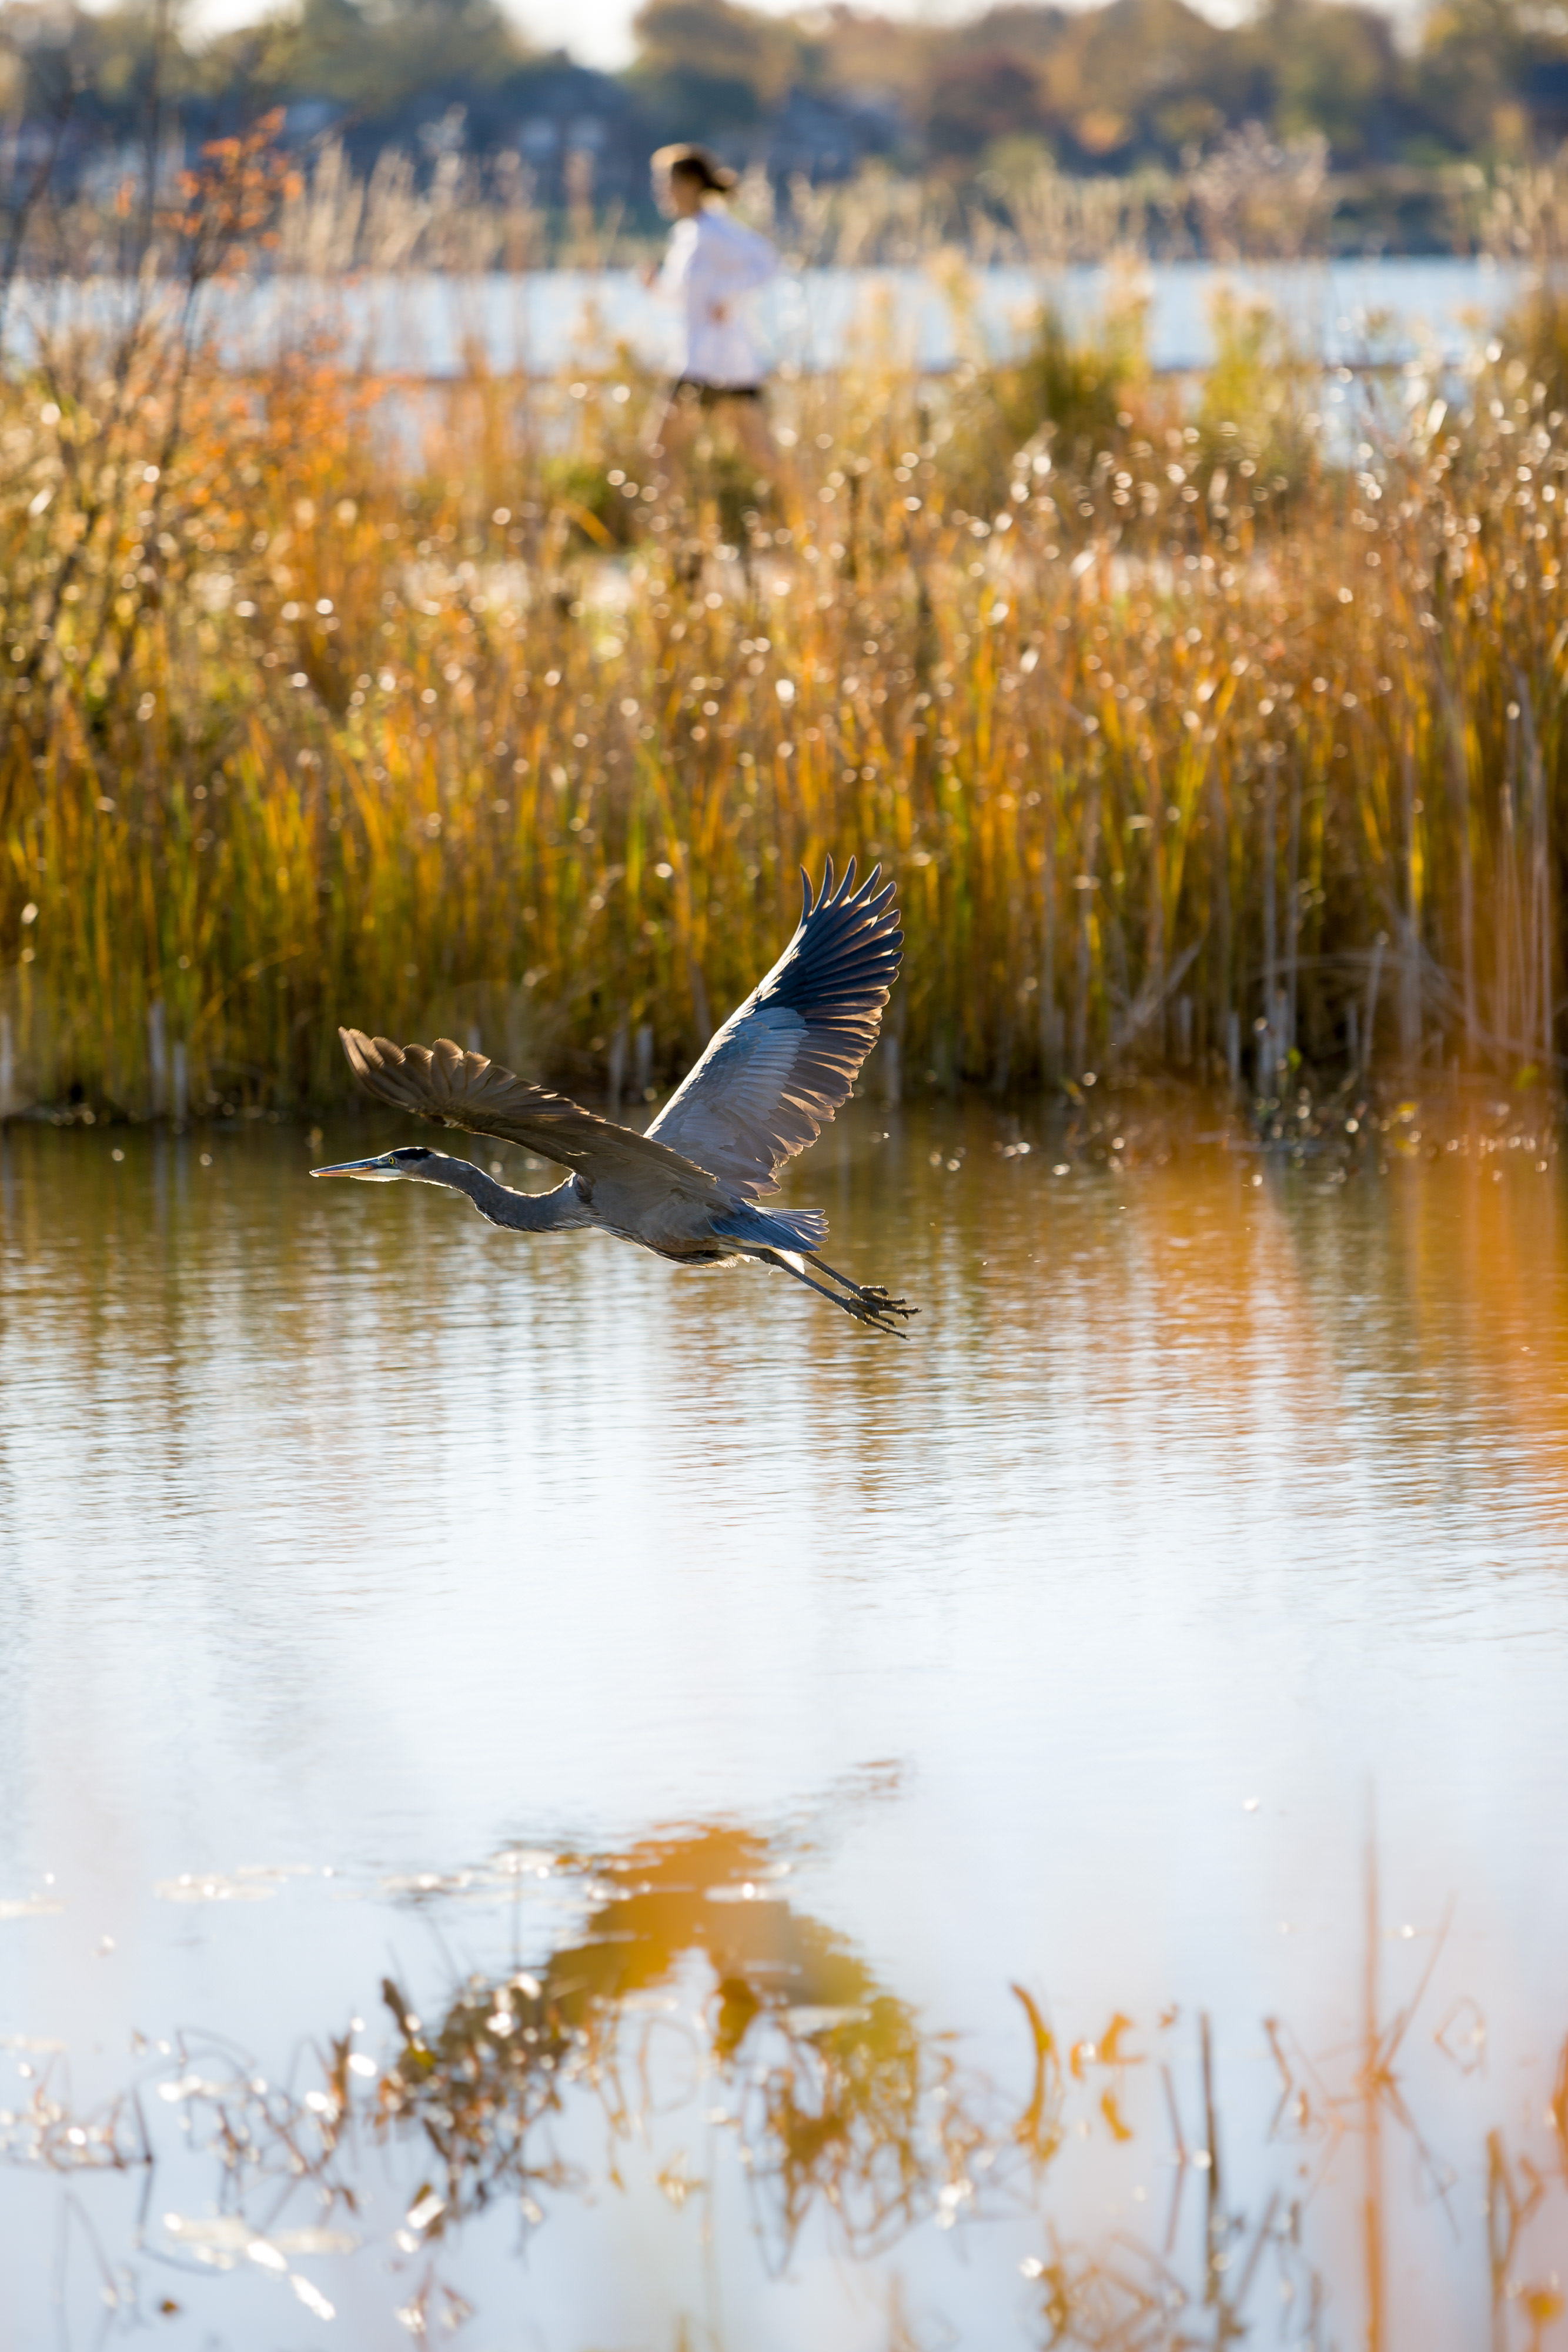 Blue heron in flight over a pond. 